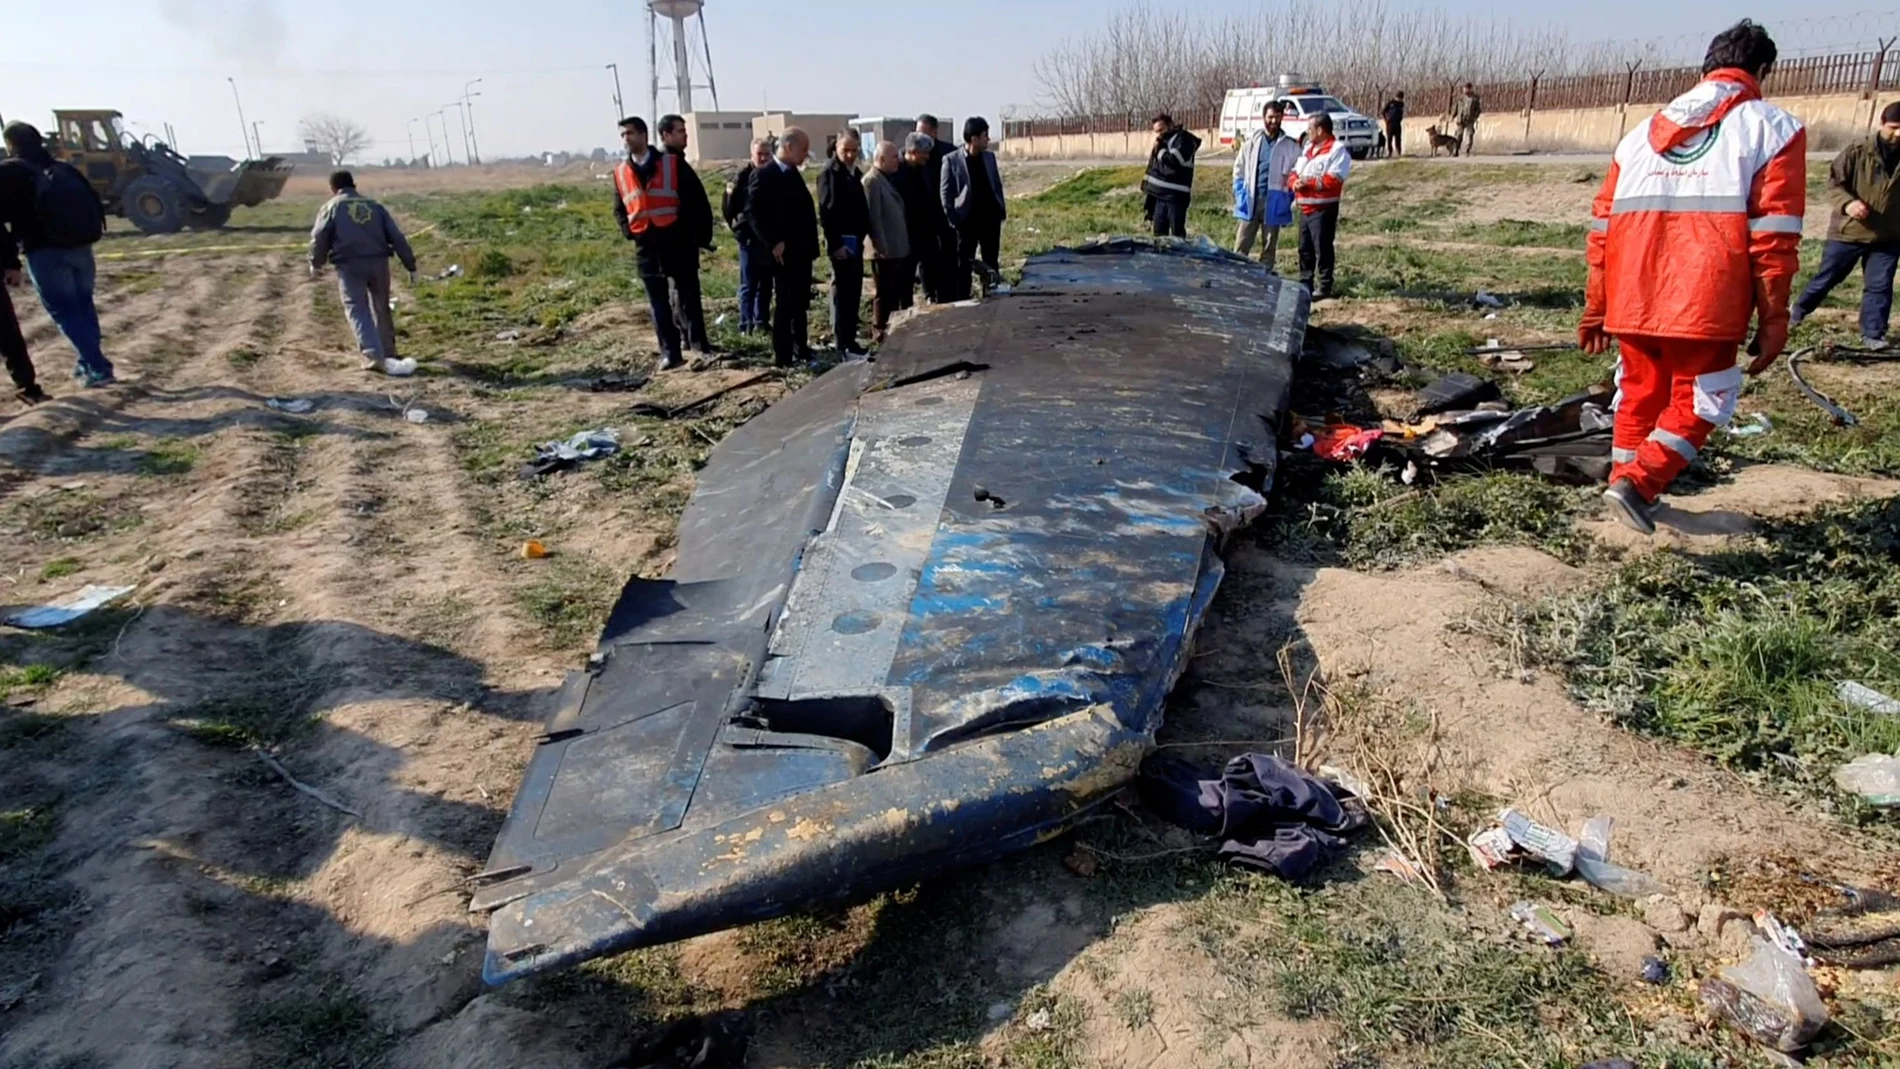 FILE PHOTO: General view of the debris of the Ukraine International Airlines, flight PS752, Boeing 737-800 plane that crashed after take-off from Iran's Imam Khomeini airport, on the outskirts of Tehran